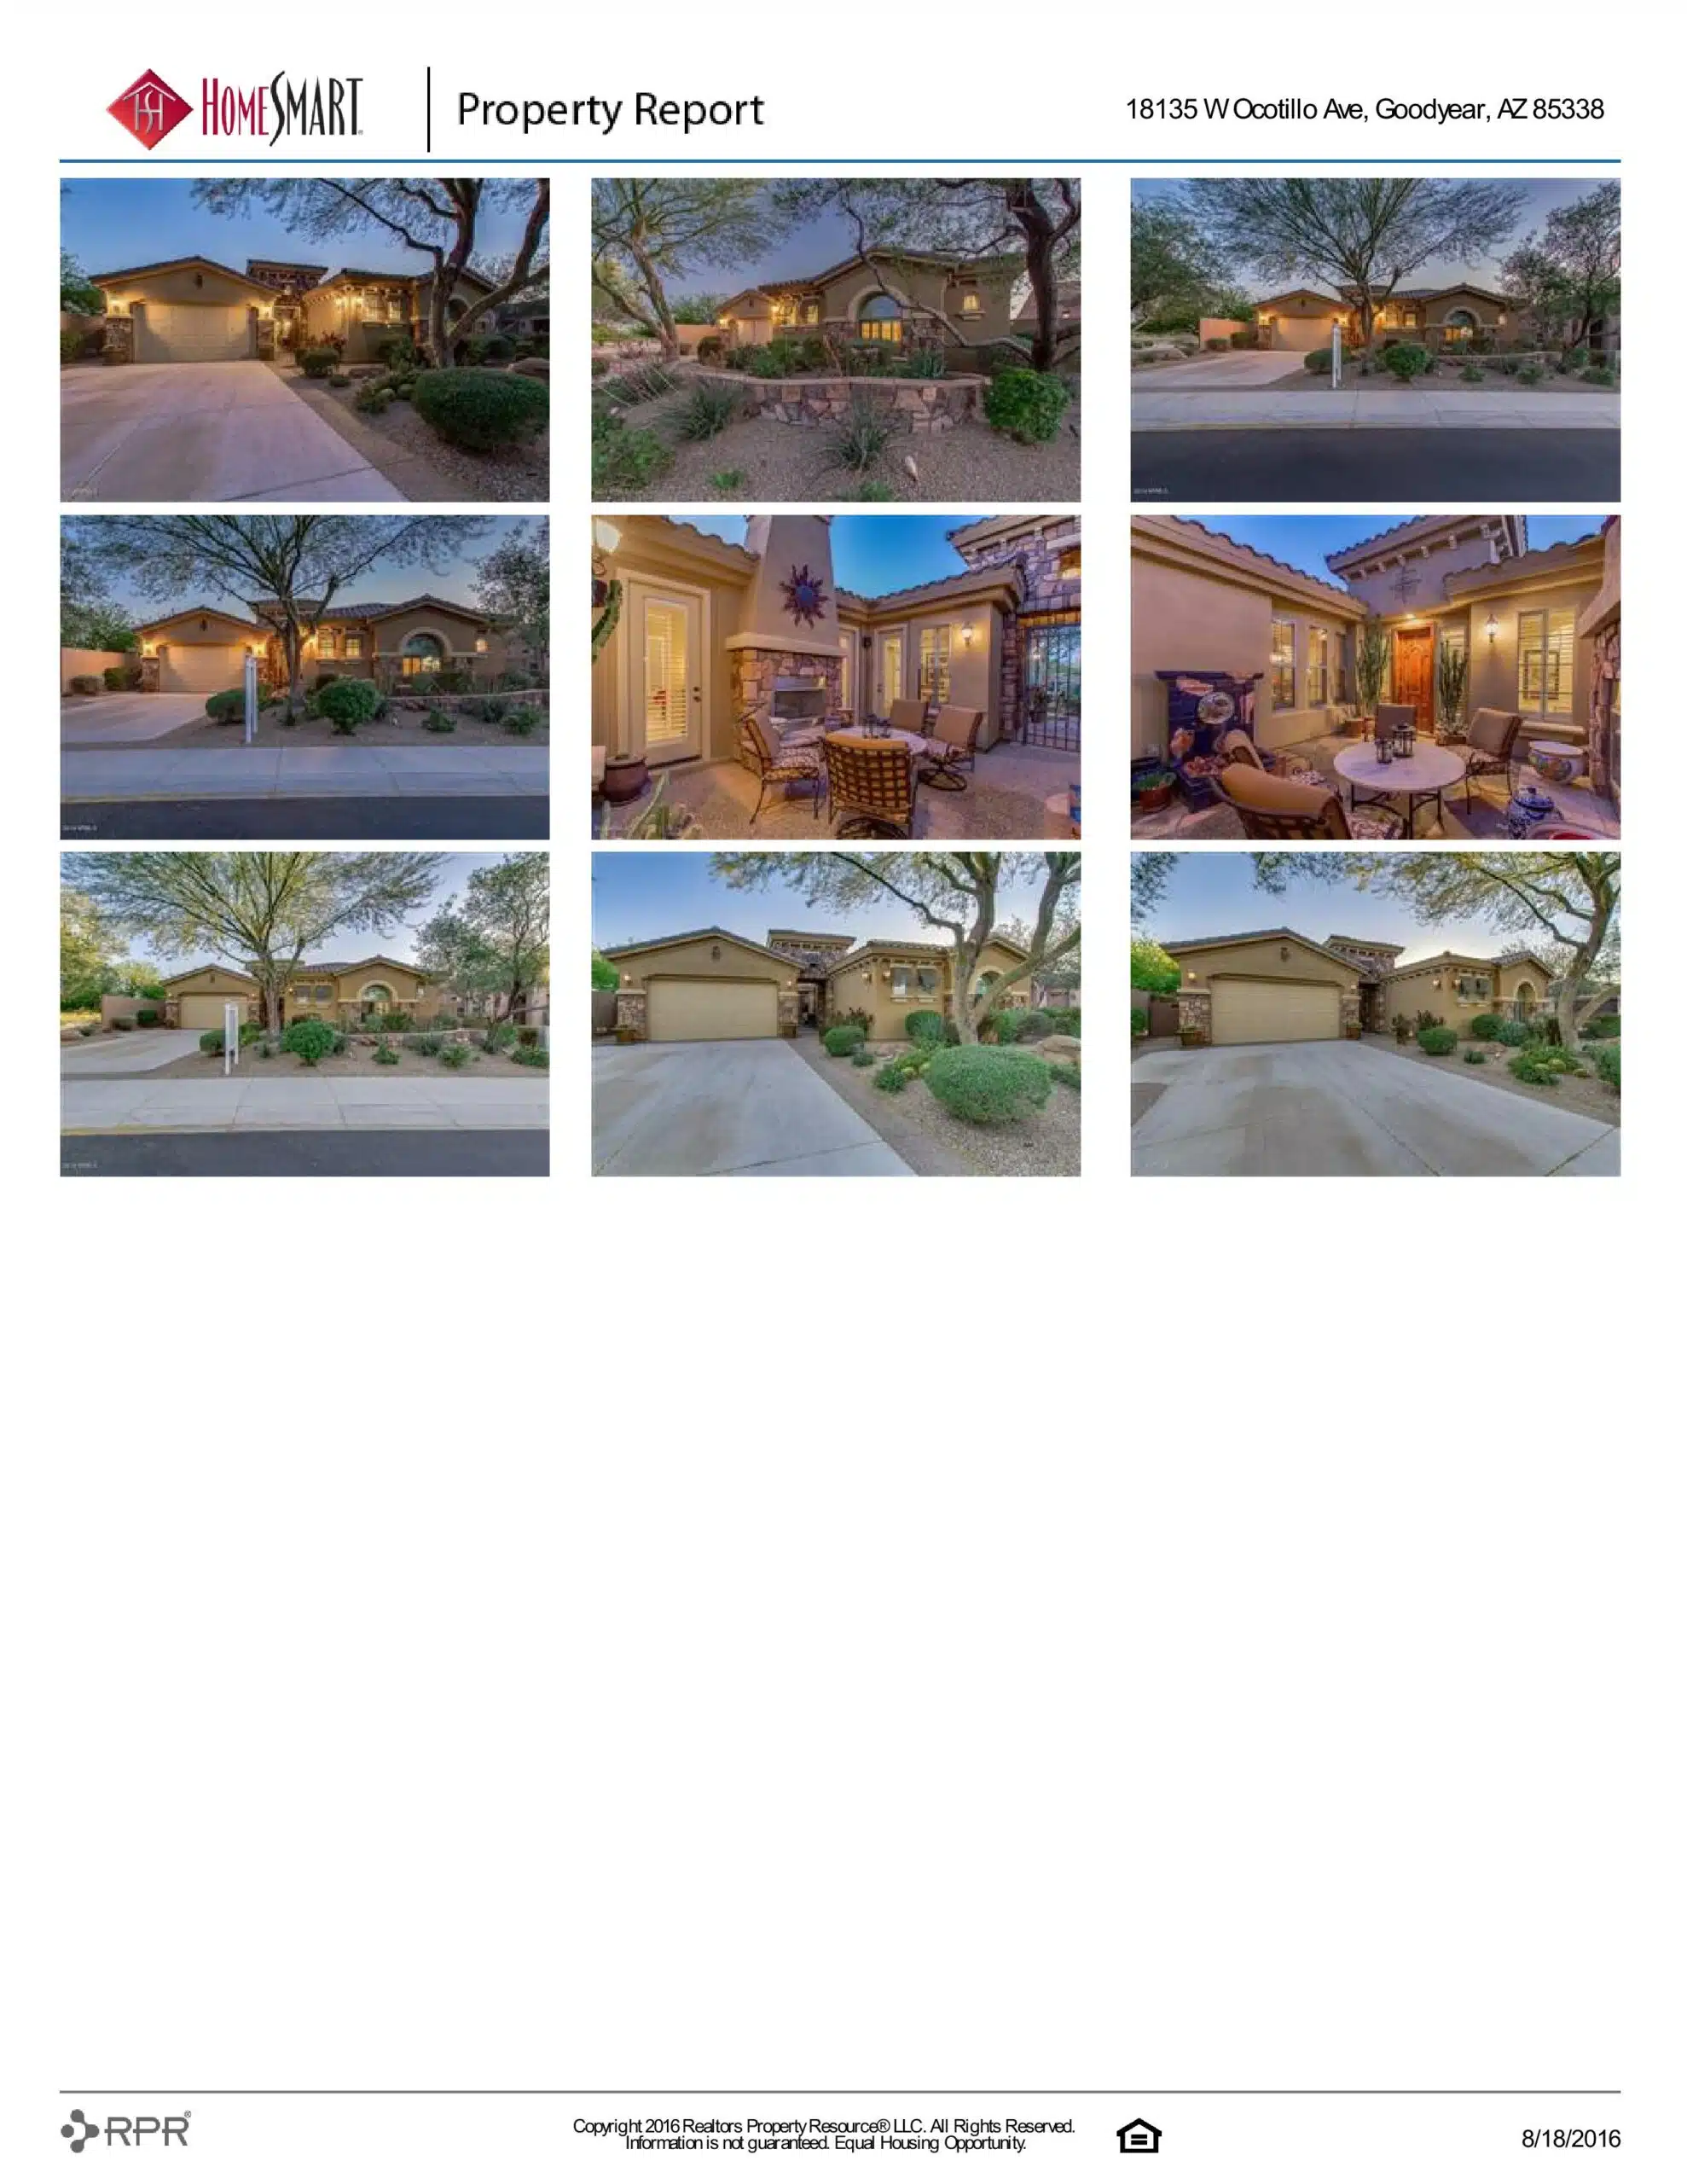 Property-Report_18135-W-Ocotillo-Ave-Goodyear-AZ-85338_2016-08-18-09-56-21-page-007